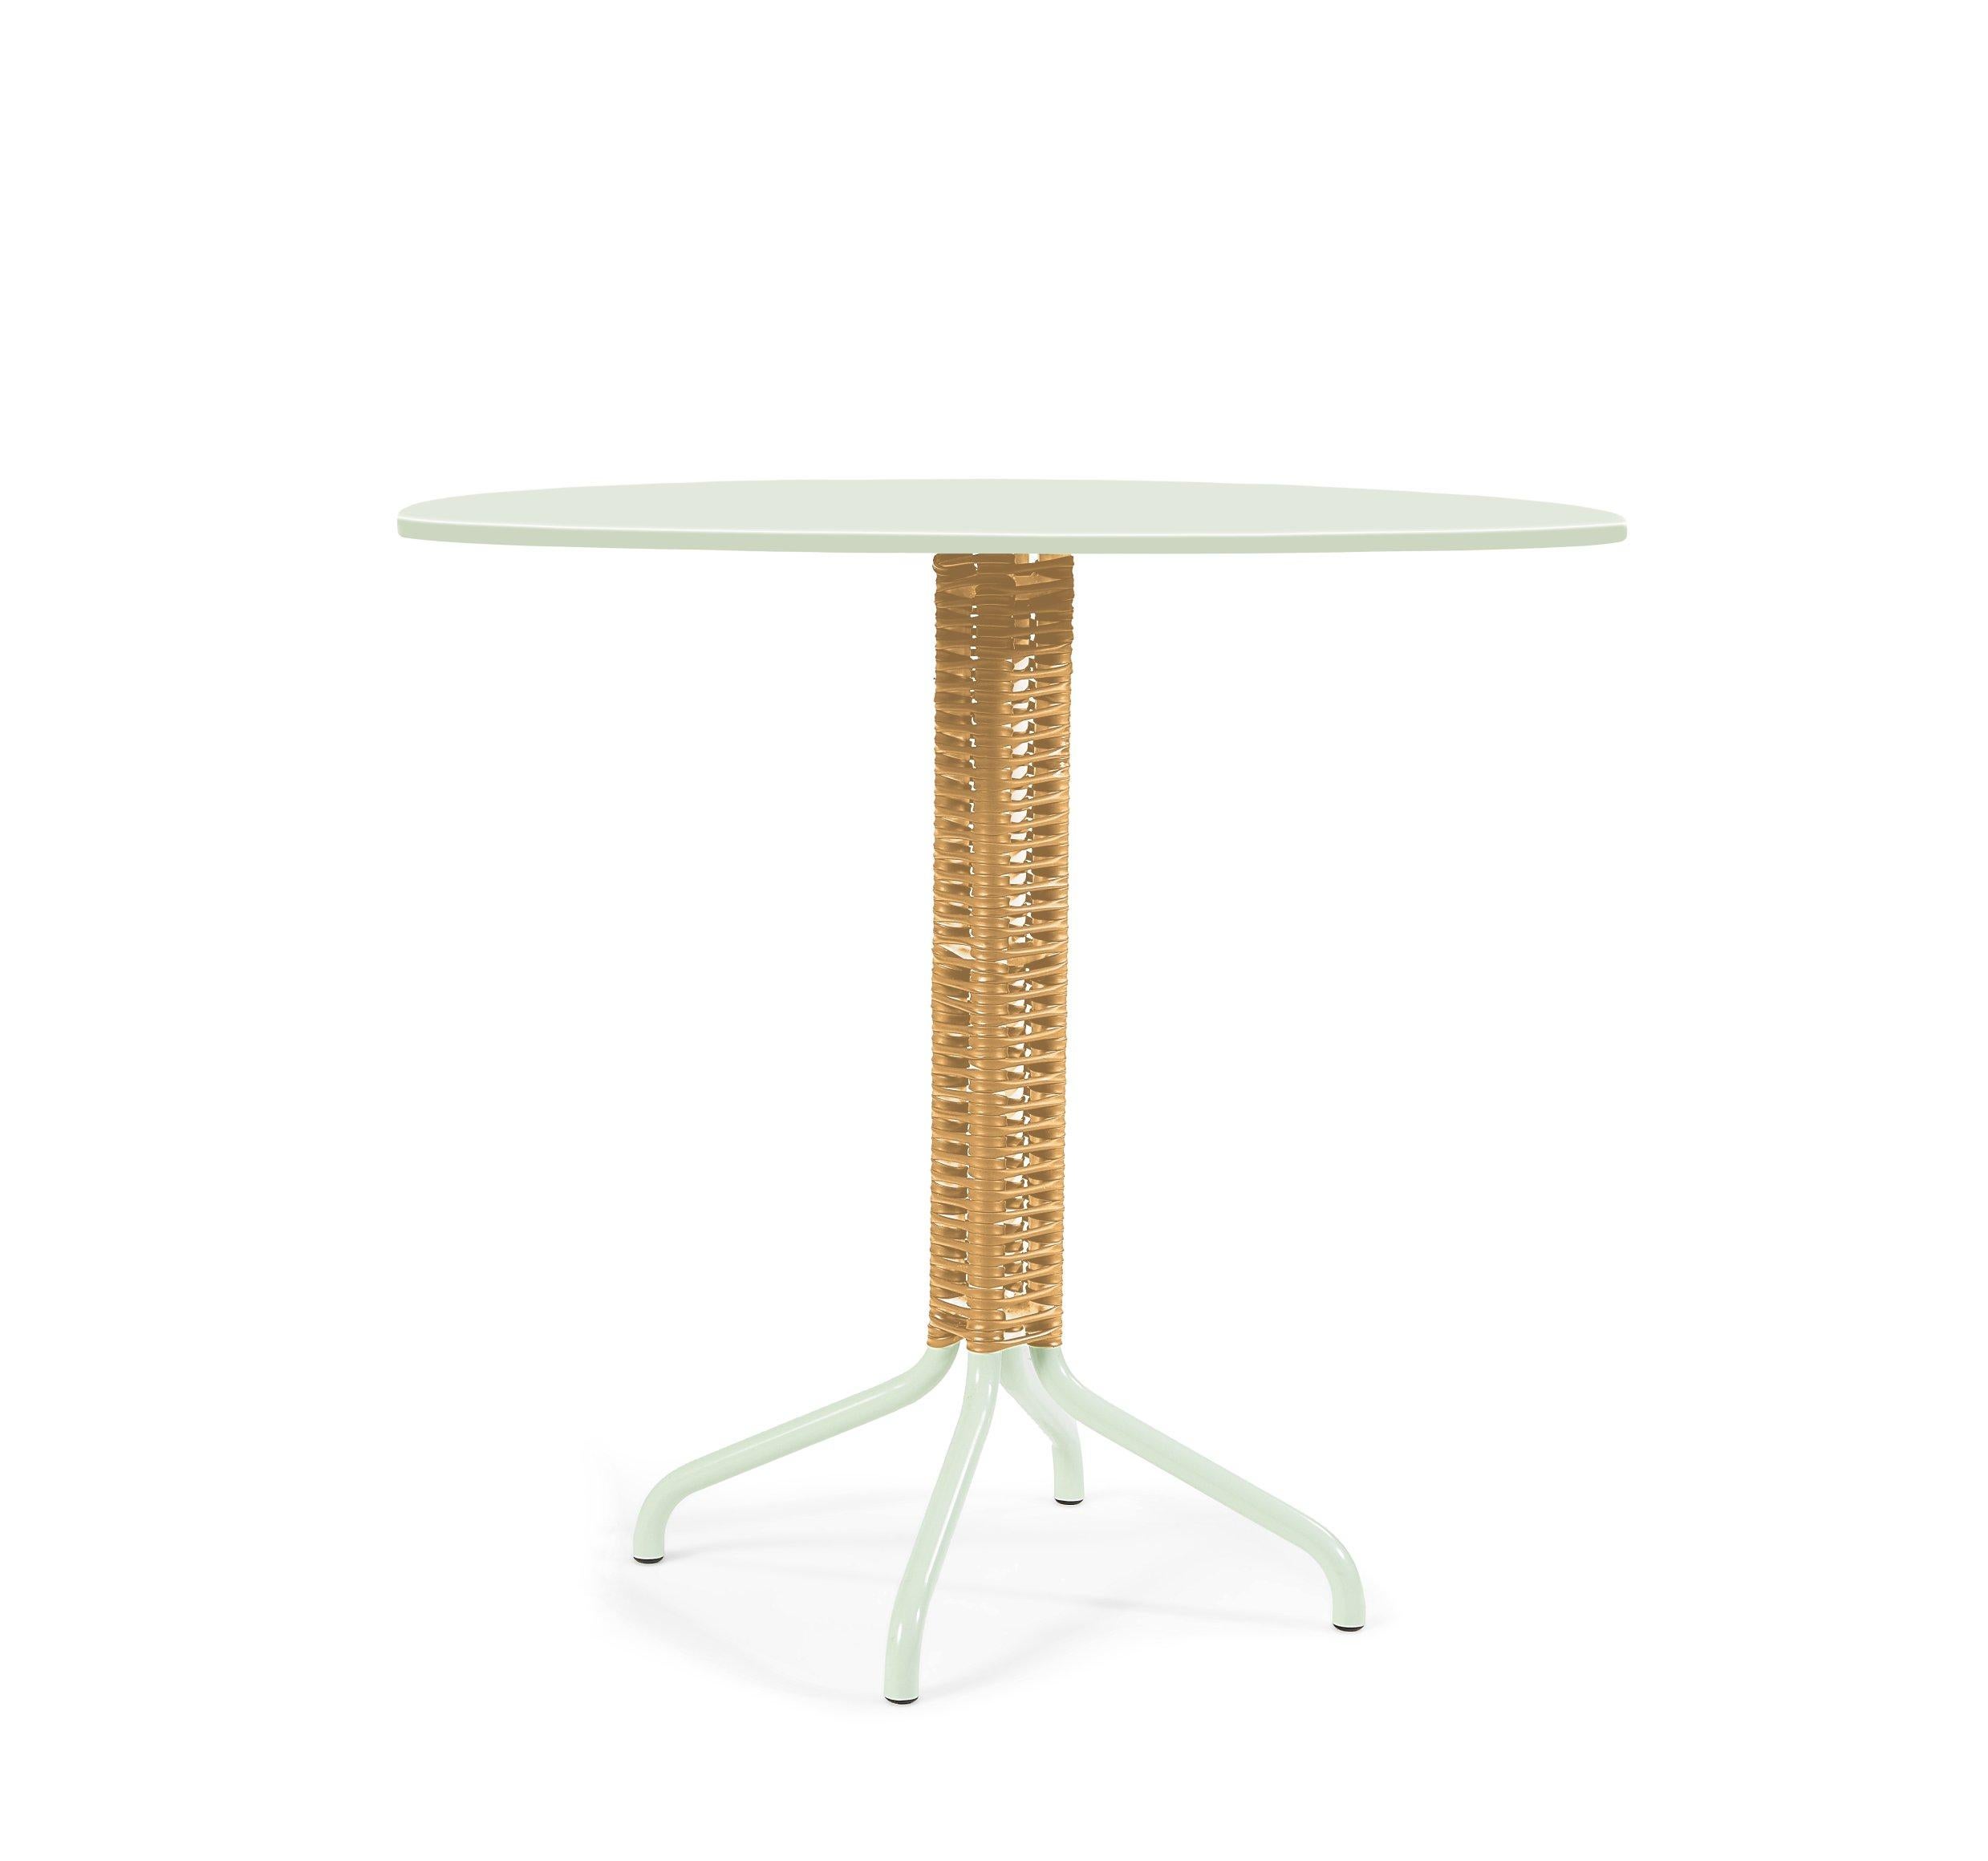 Honey bistro table by Sebastian Herkner
Dimensions: 60 x 73 x 60 cm
Materials: Steel

The popular cielo collection of chairs, loungers and lounge chairs, designed by Sebastian Herkner, is once again expanding: the elegant bistro table stands on